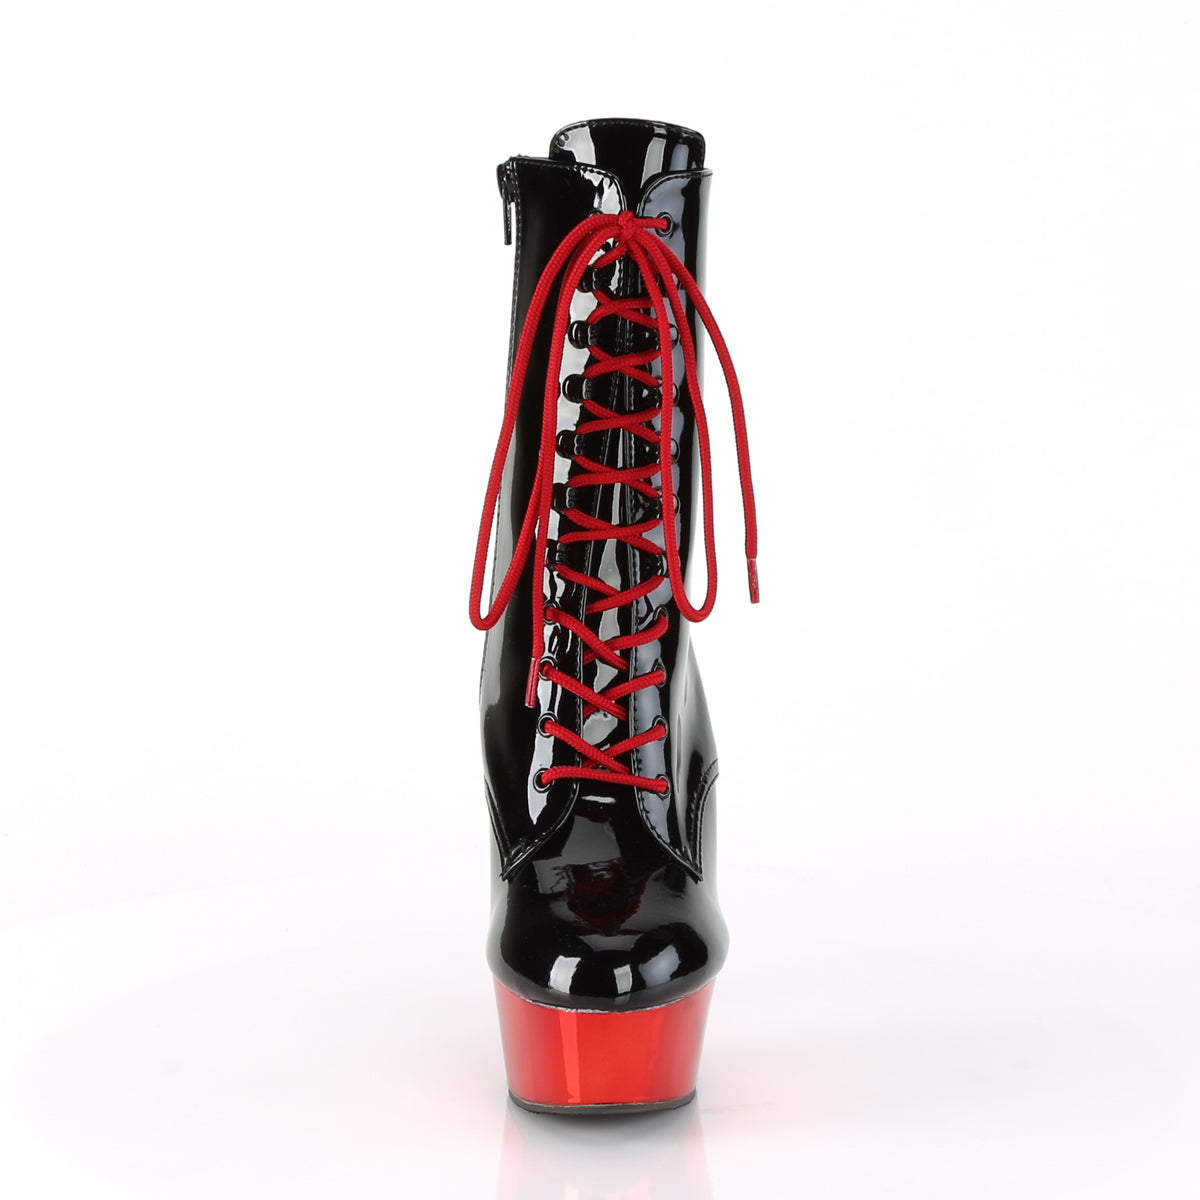 DELIGHT-1020 6" Black with Red Chrome Pole Dancer Platforms-Pleaser- Sexy Shoes Alternative Footwear